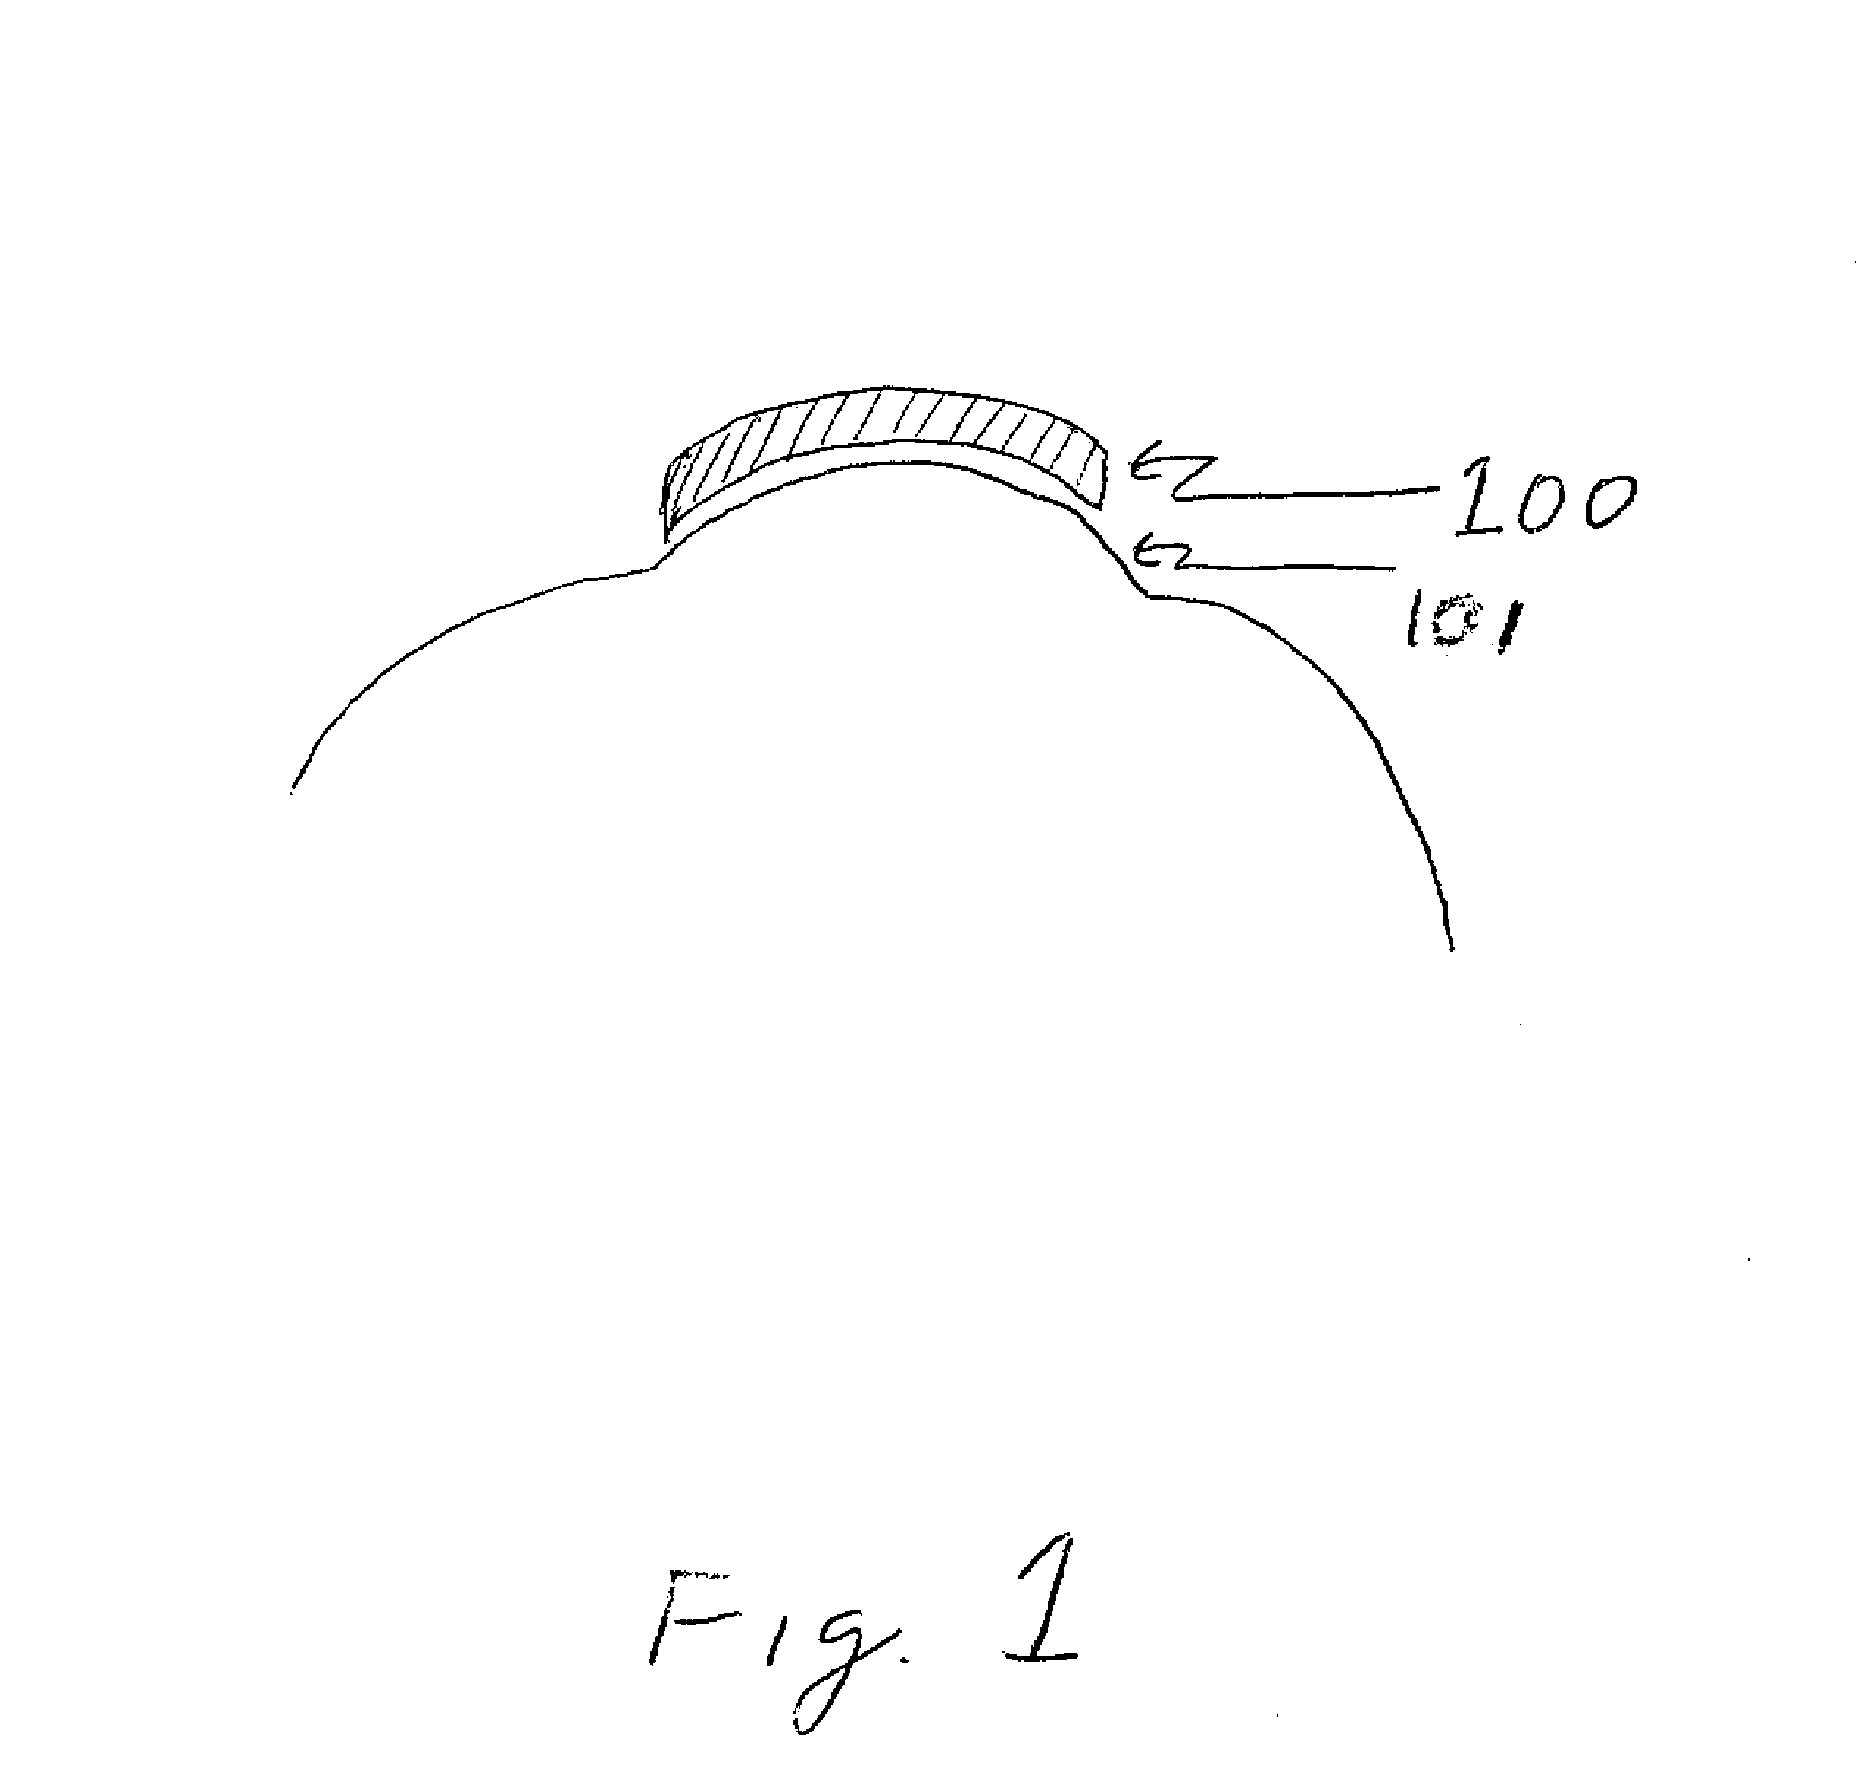 Apparatus and Method for Removing Epithelium from the Cornea